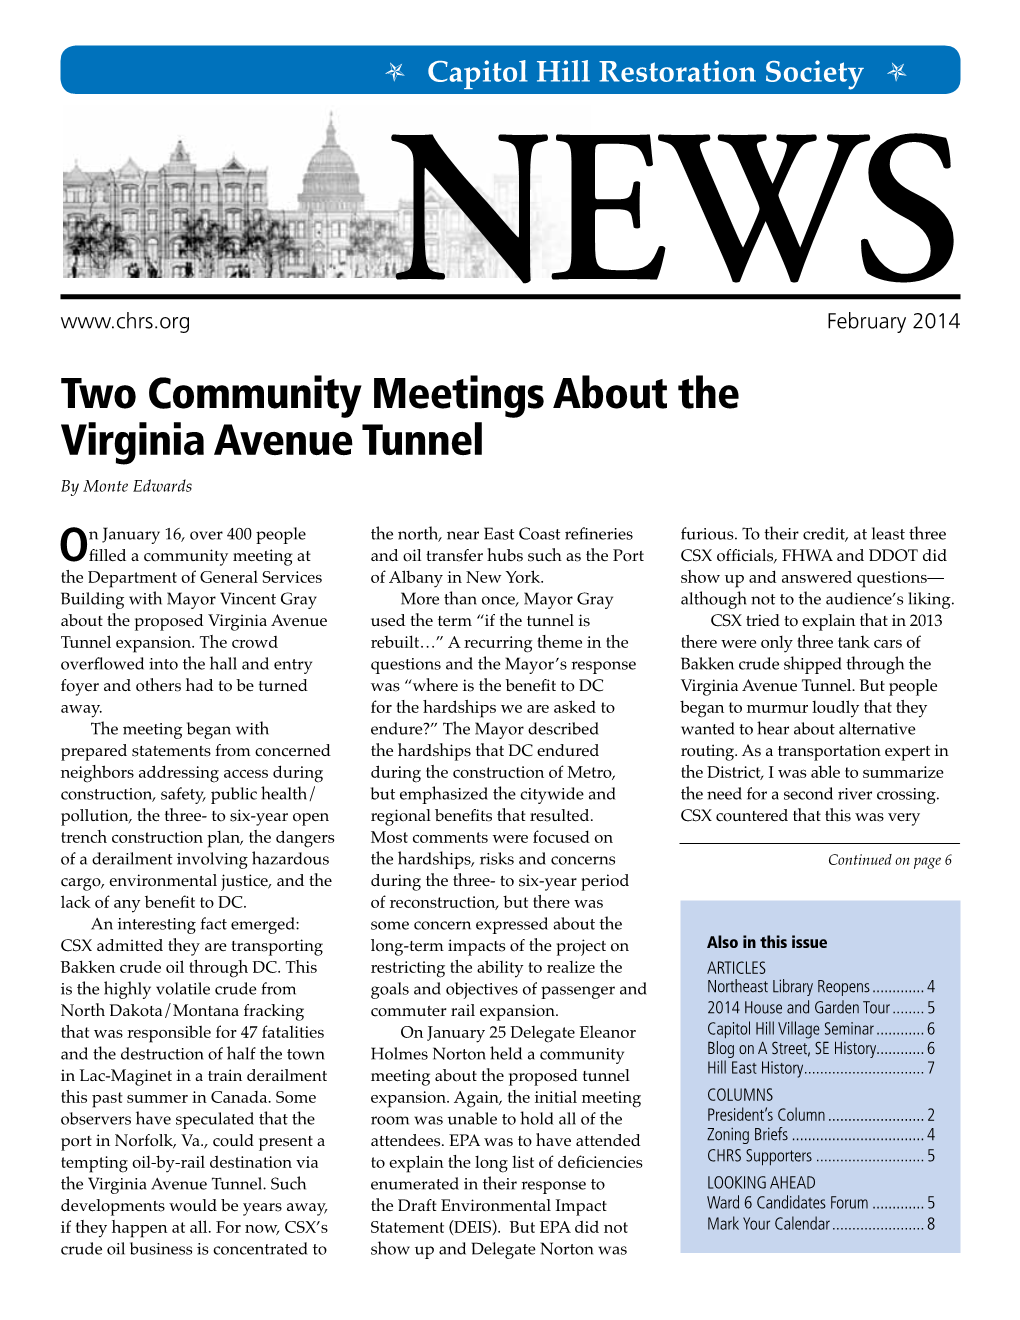 Two Community Meetings About the Virginia Avenue Tunnel